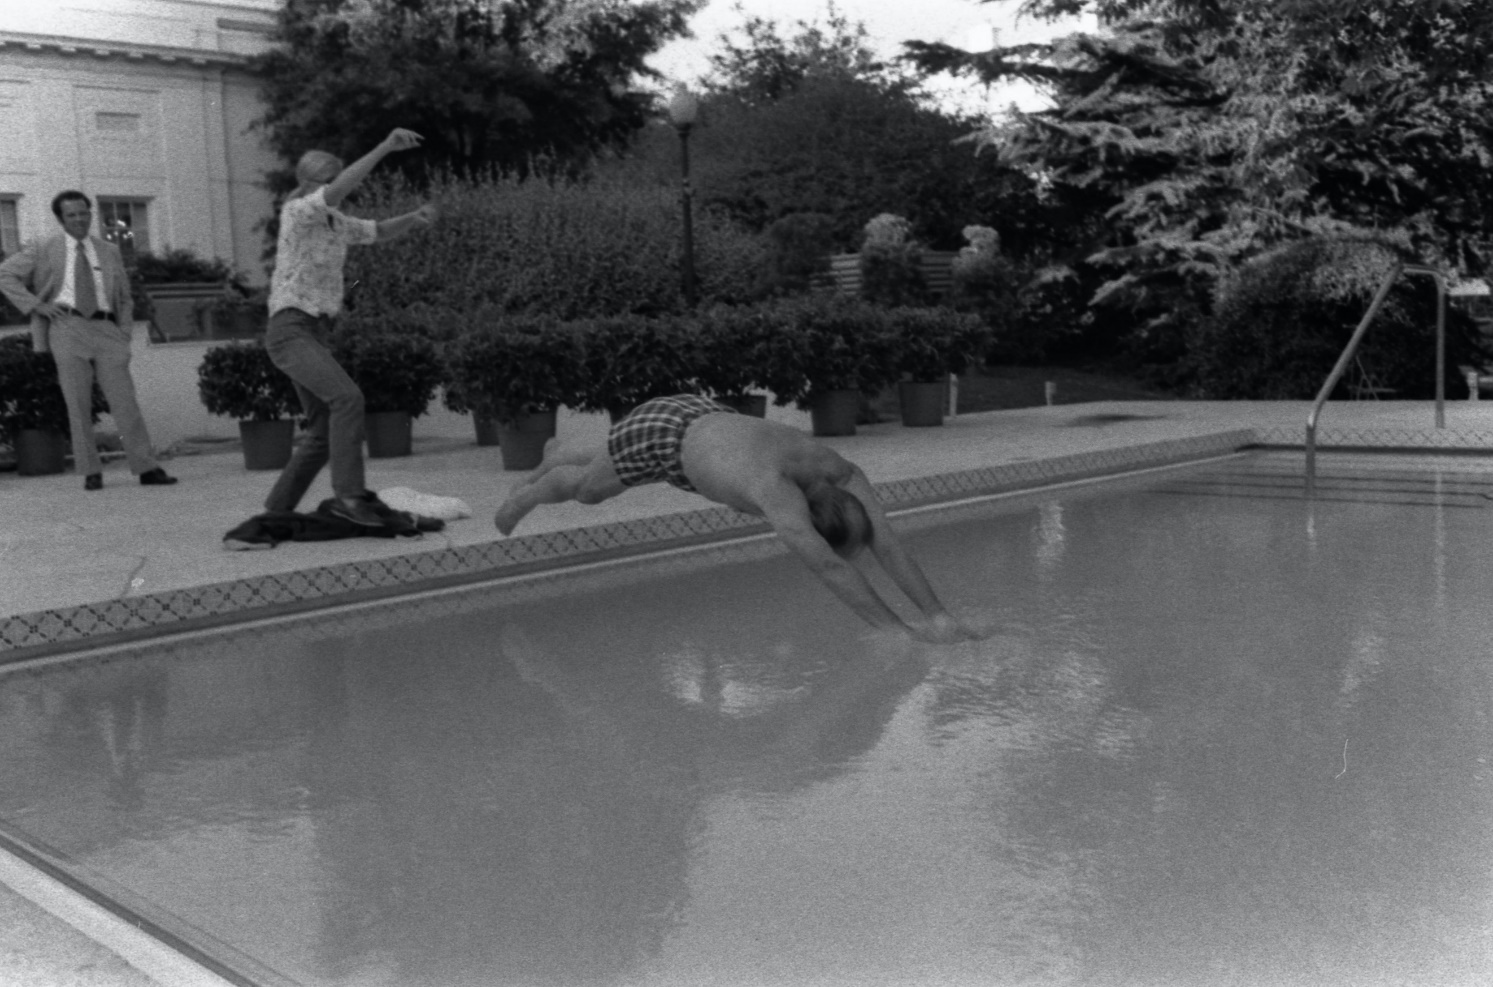 President Ford diving into the White House's swimming pool